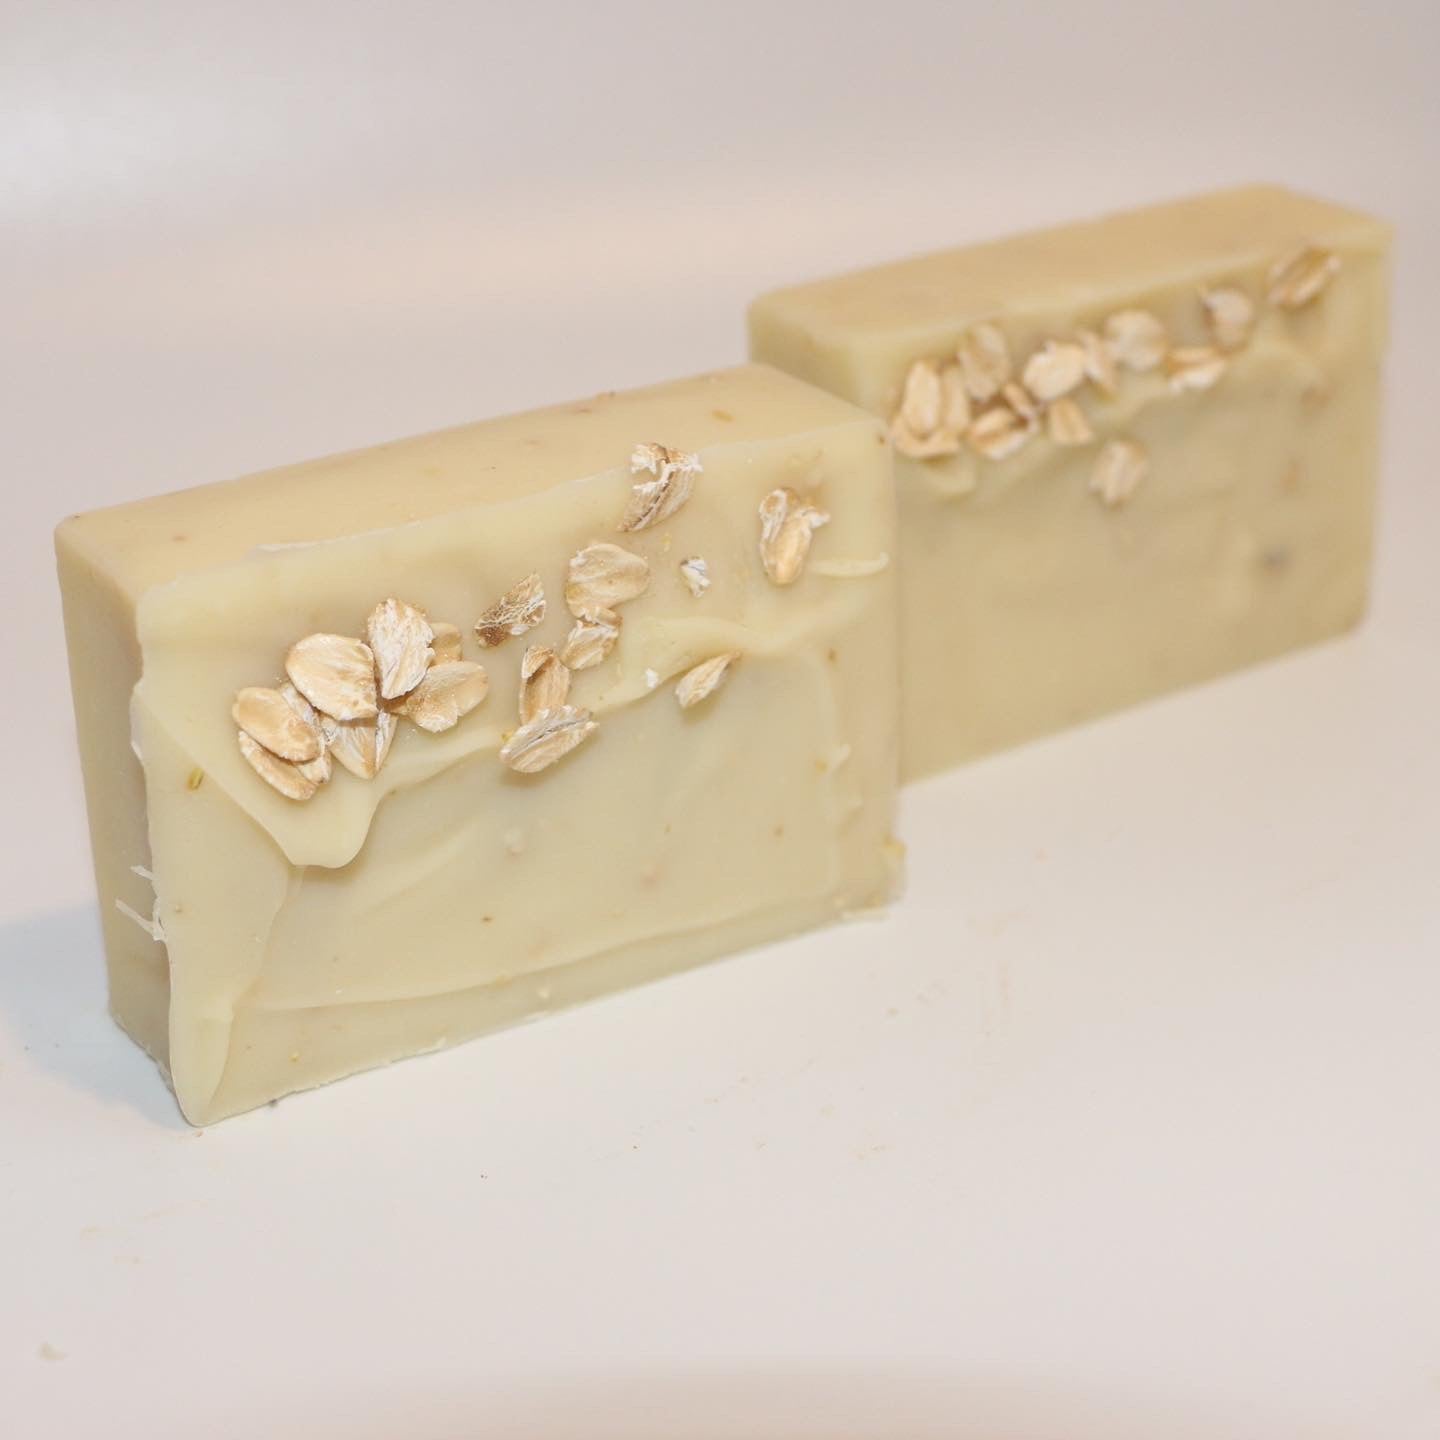 Shea Butter Soap Cold Process Soap Soothes Dry Skin With Shea Butter, Cocoa  Butter, Mango Butter 3 Bar PACK -  Norway